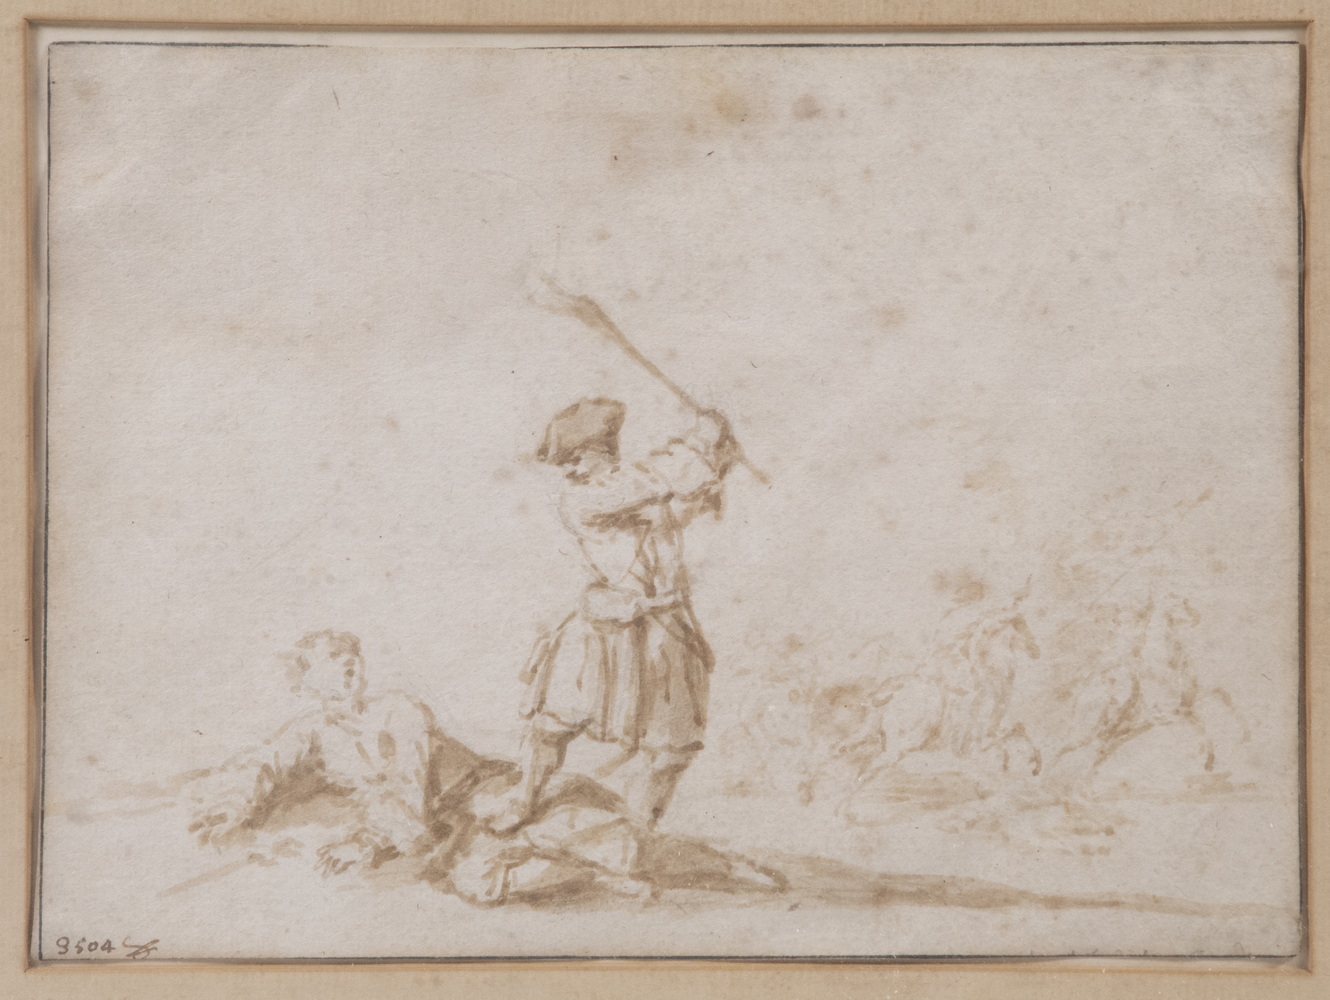 OLD MASTER DRAWING 17th c. Depiction